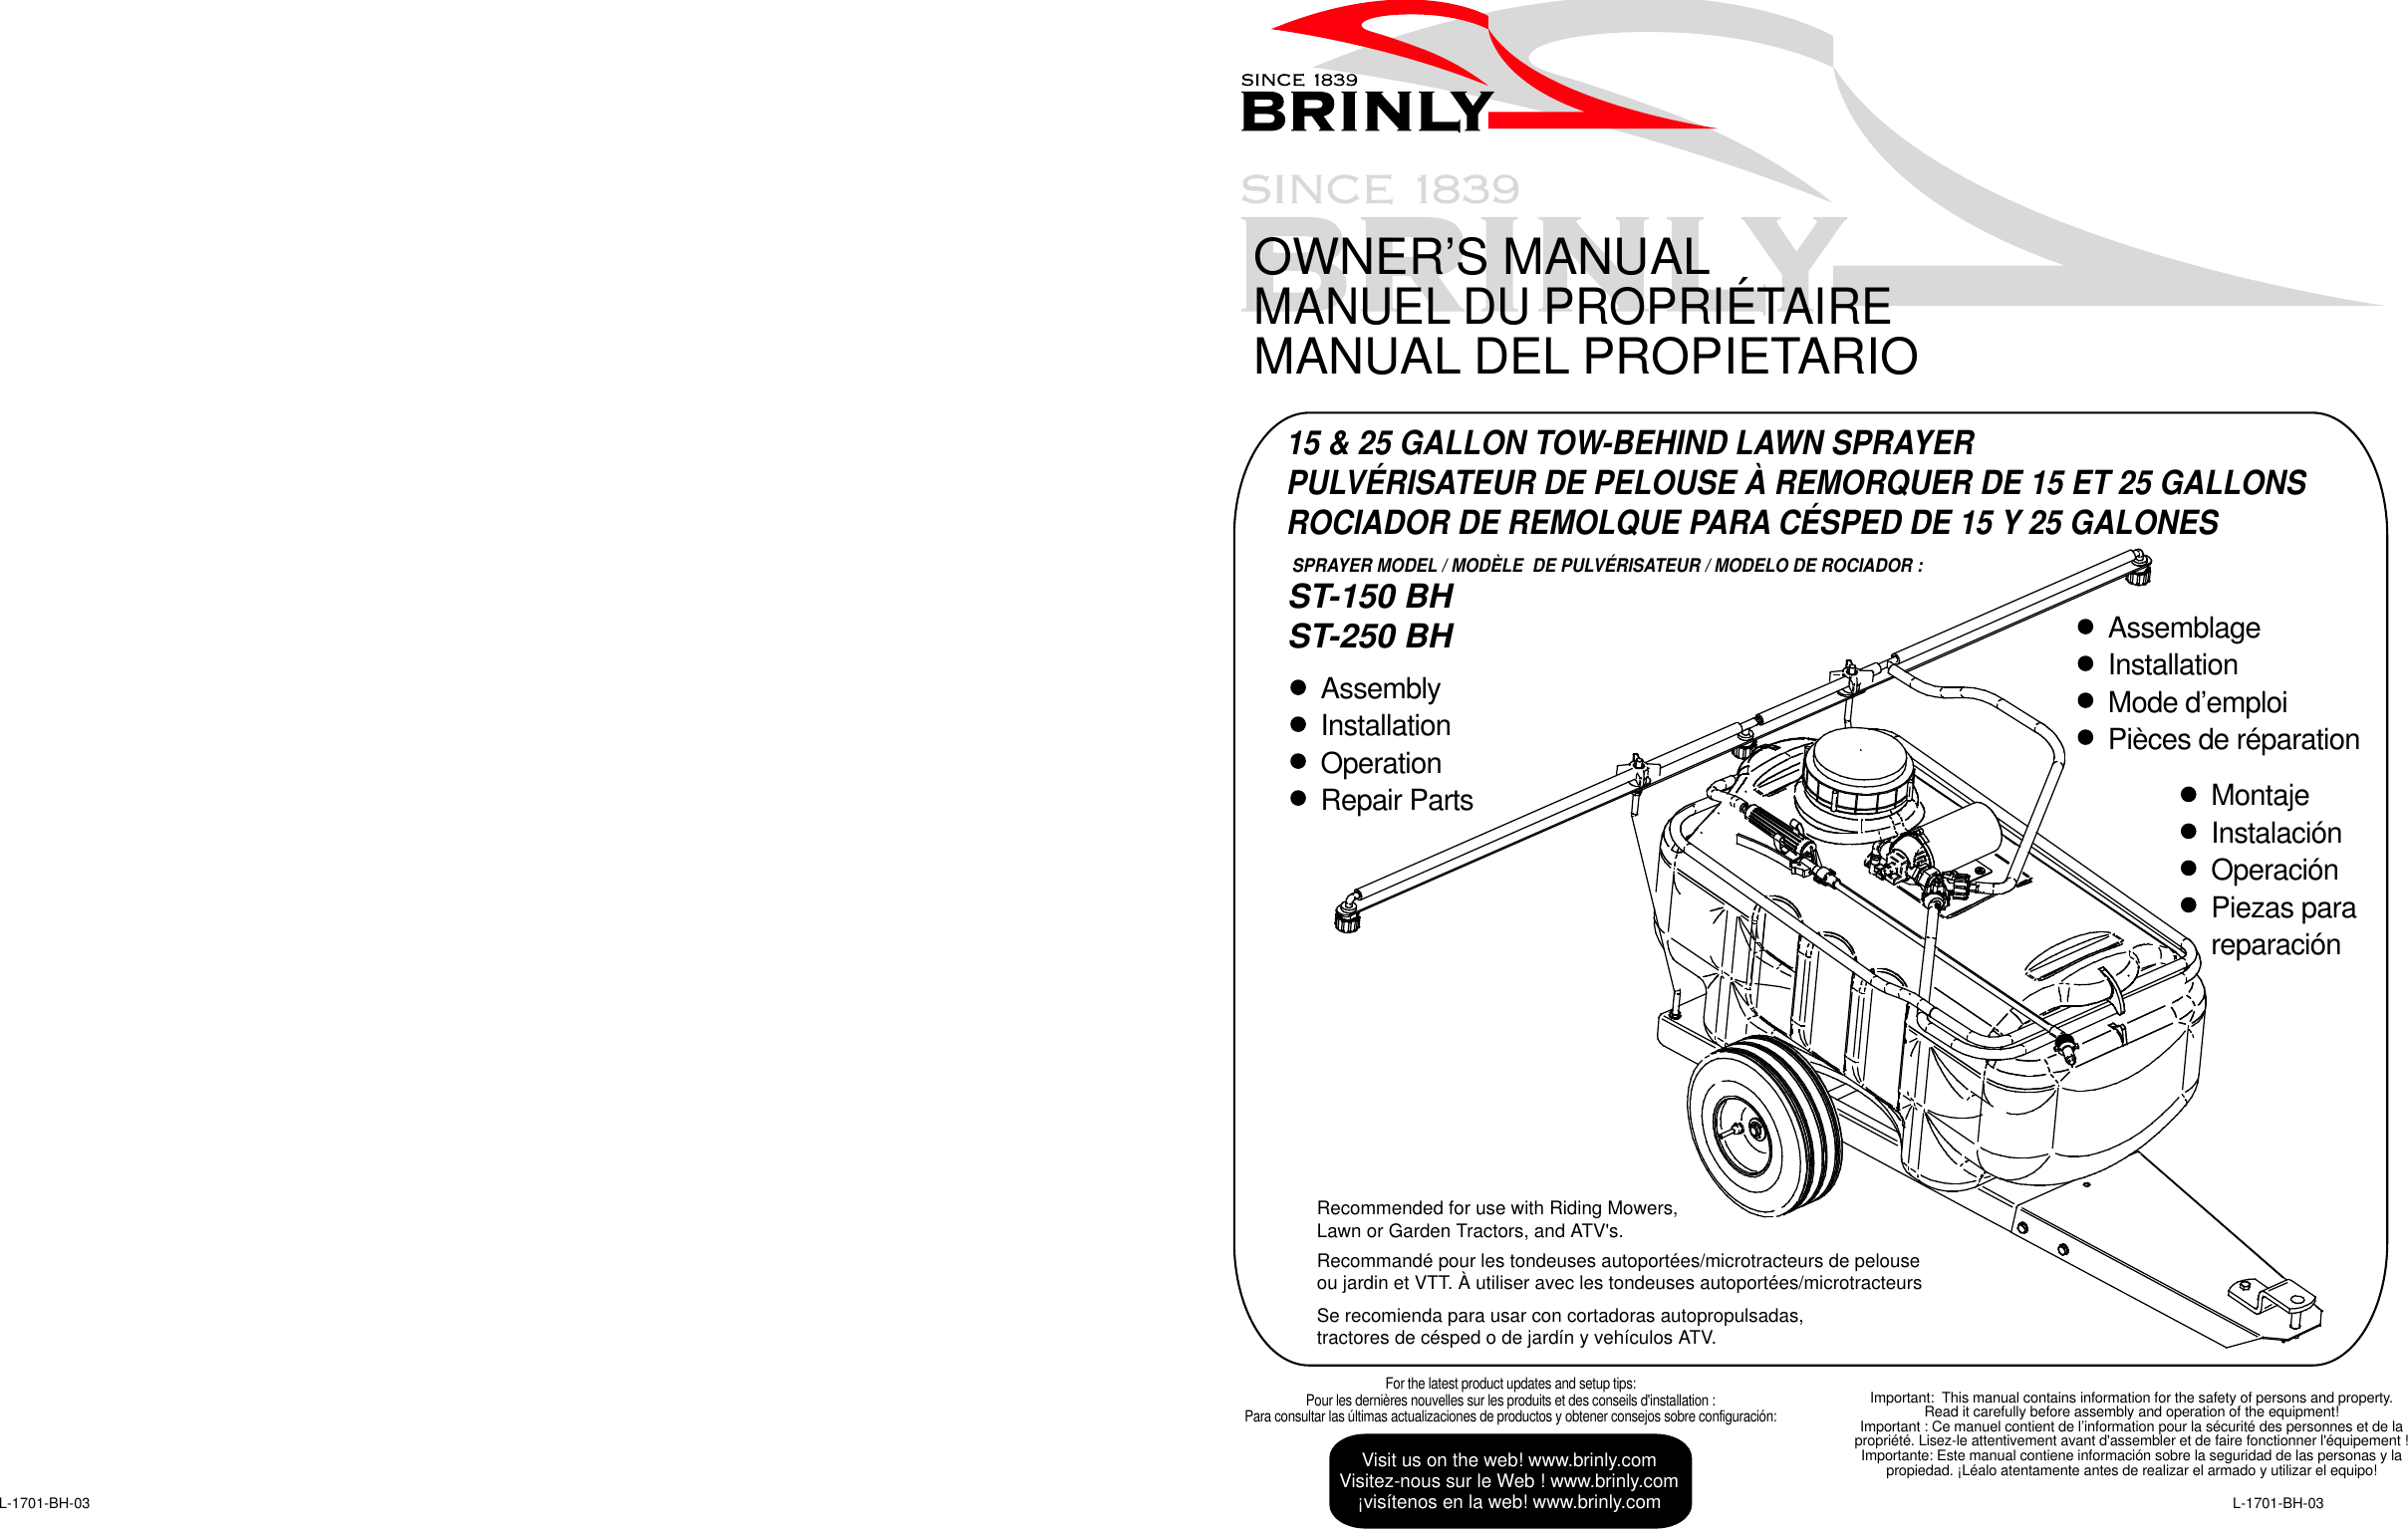 Page 1 of 10 - Brinly-Hardy Brinly-Hardy-Brinly-Hardy-Lawn-Aerator-15-And-25-Gallon-Tow-Behind-Lawn-Sprayer-Users-Manual- 12-1  Brinly-hardy-brinly-hardy-lawn-aerator-15-and-25-gallon-tow-behind-lawn-sprayer-users-manual